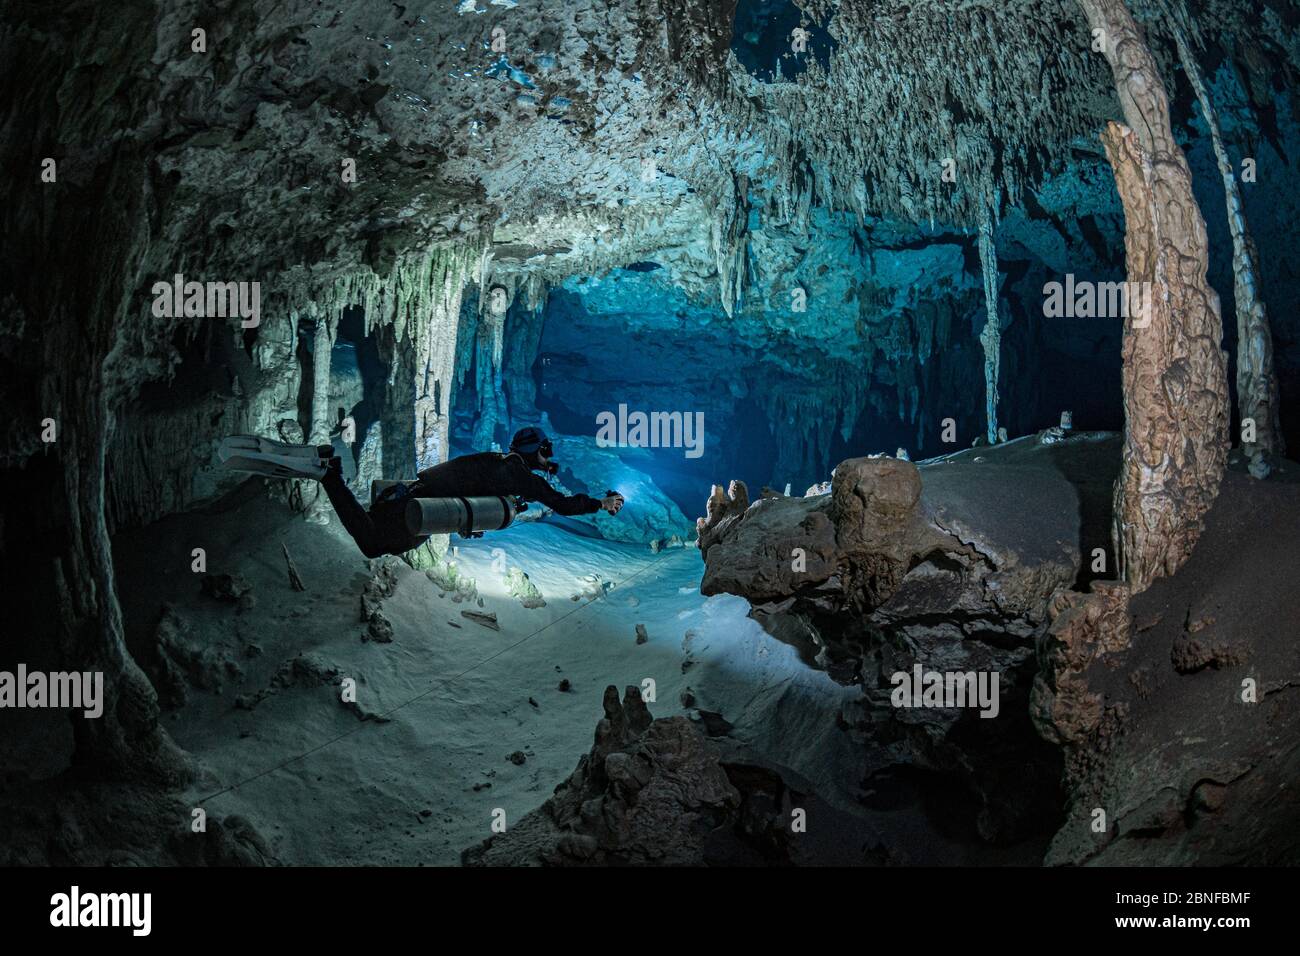 A diver in a cenote in Quintana Roo, Mexico. Stock Photo